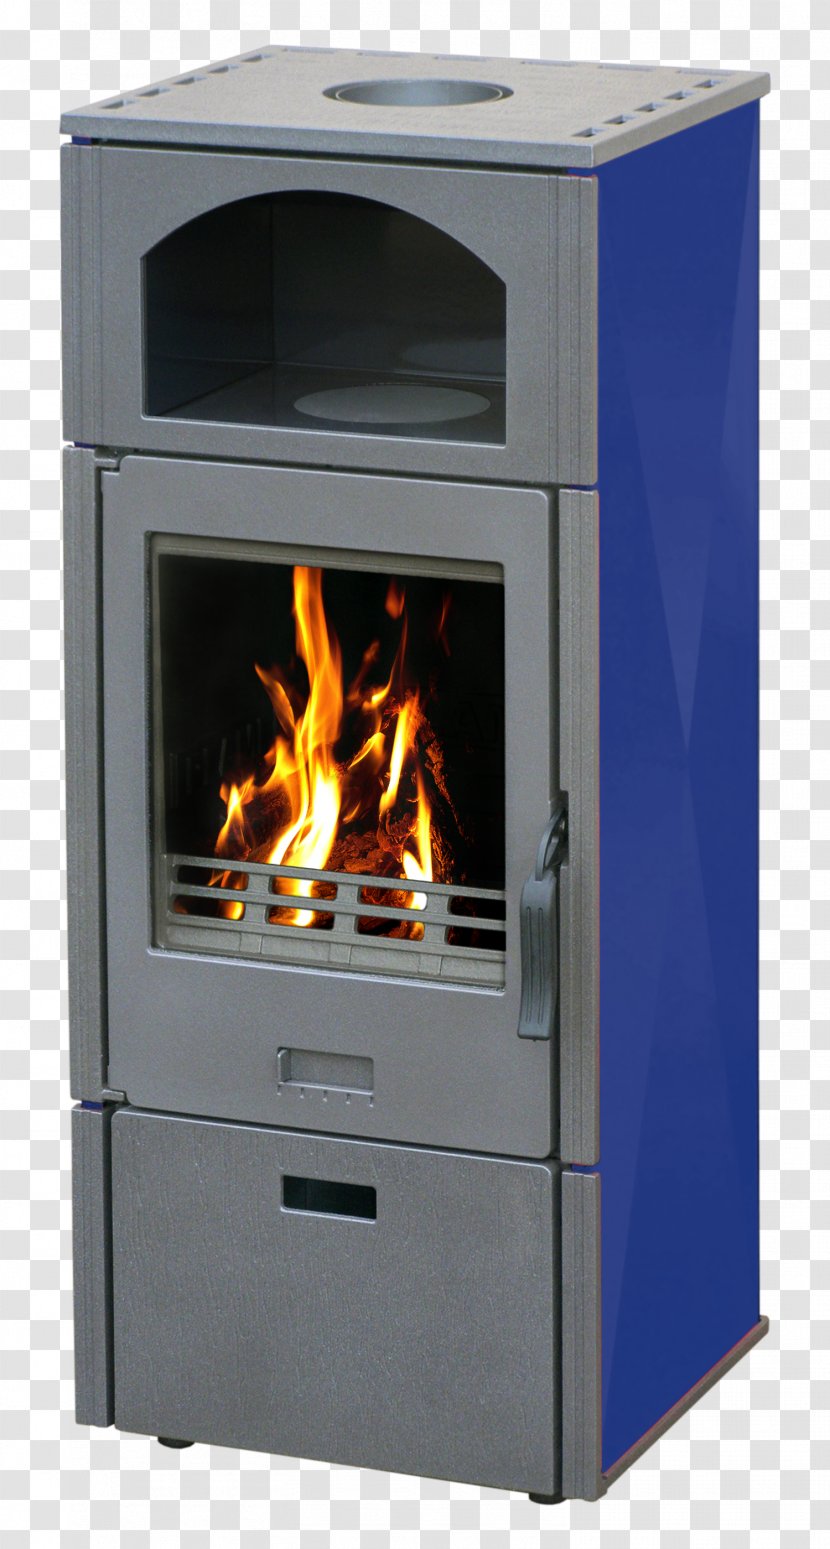 Flame Stove Fireplace Central Heating Oven Transparent PNG